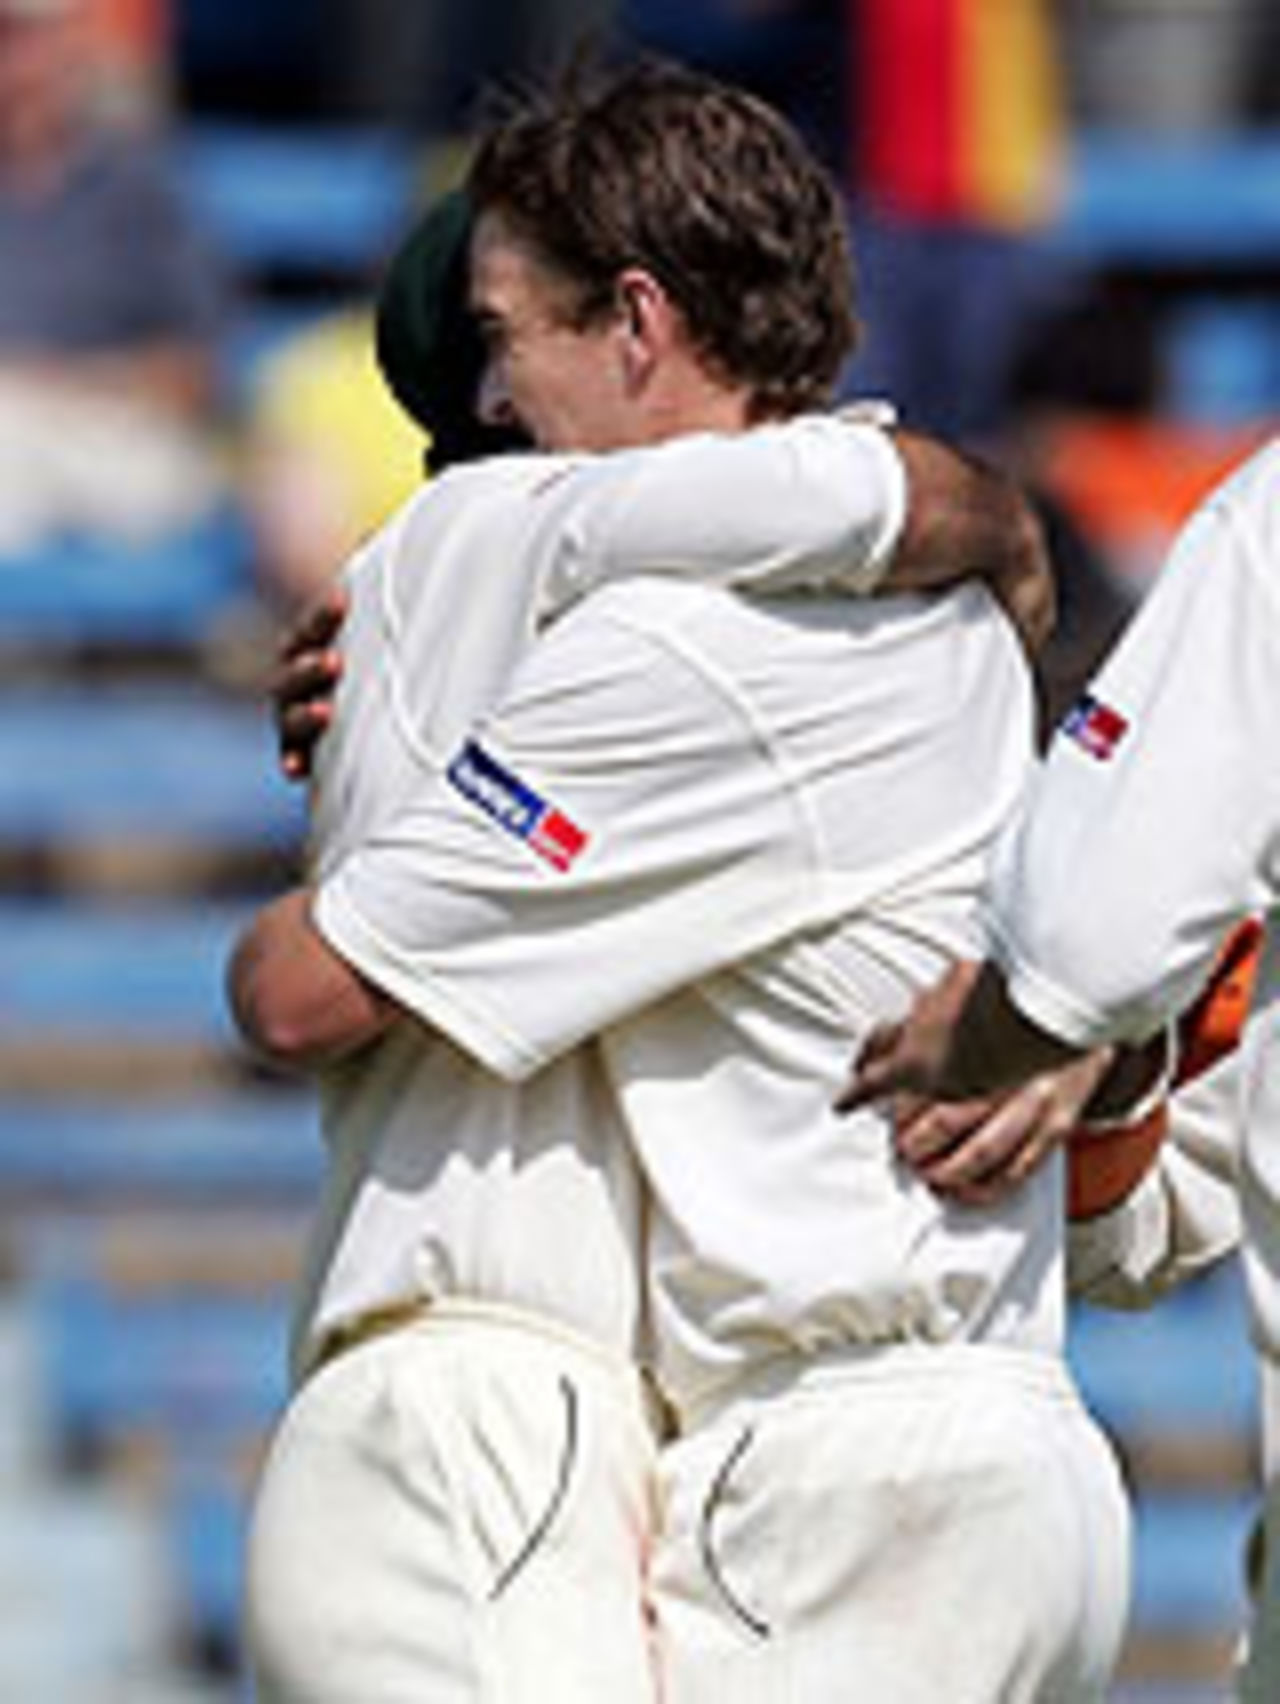 Nathan Hauritz hugs Ricky Ponting after picking up his first Test wicket, 2nd day, India v Australia, 4th Test, Mumbai, November 4, 2004